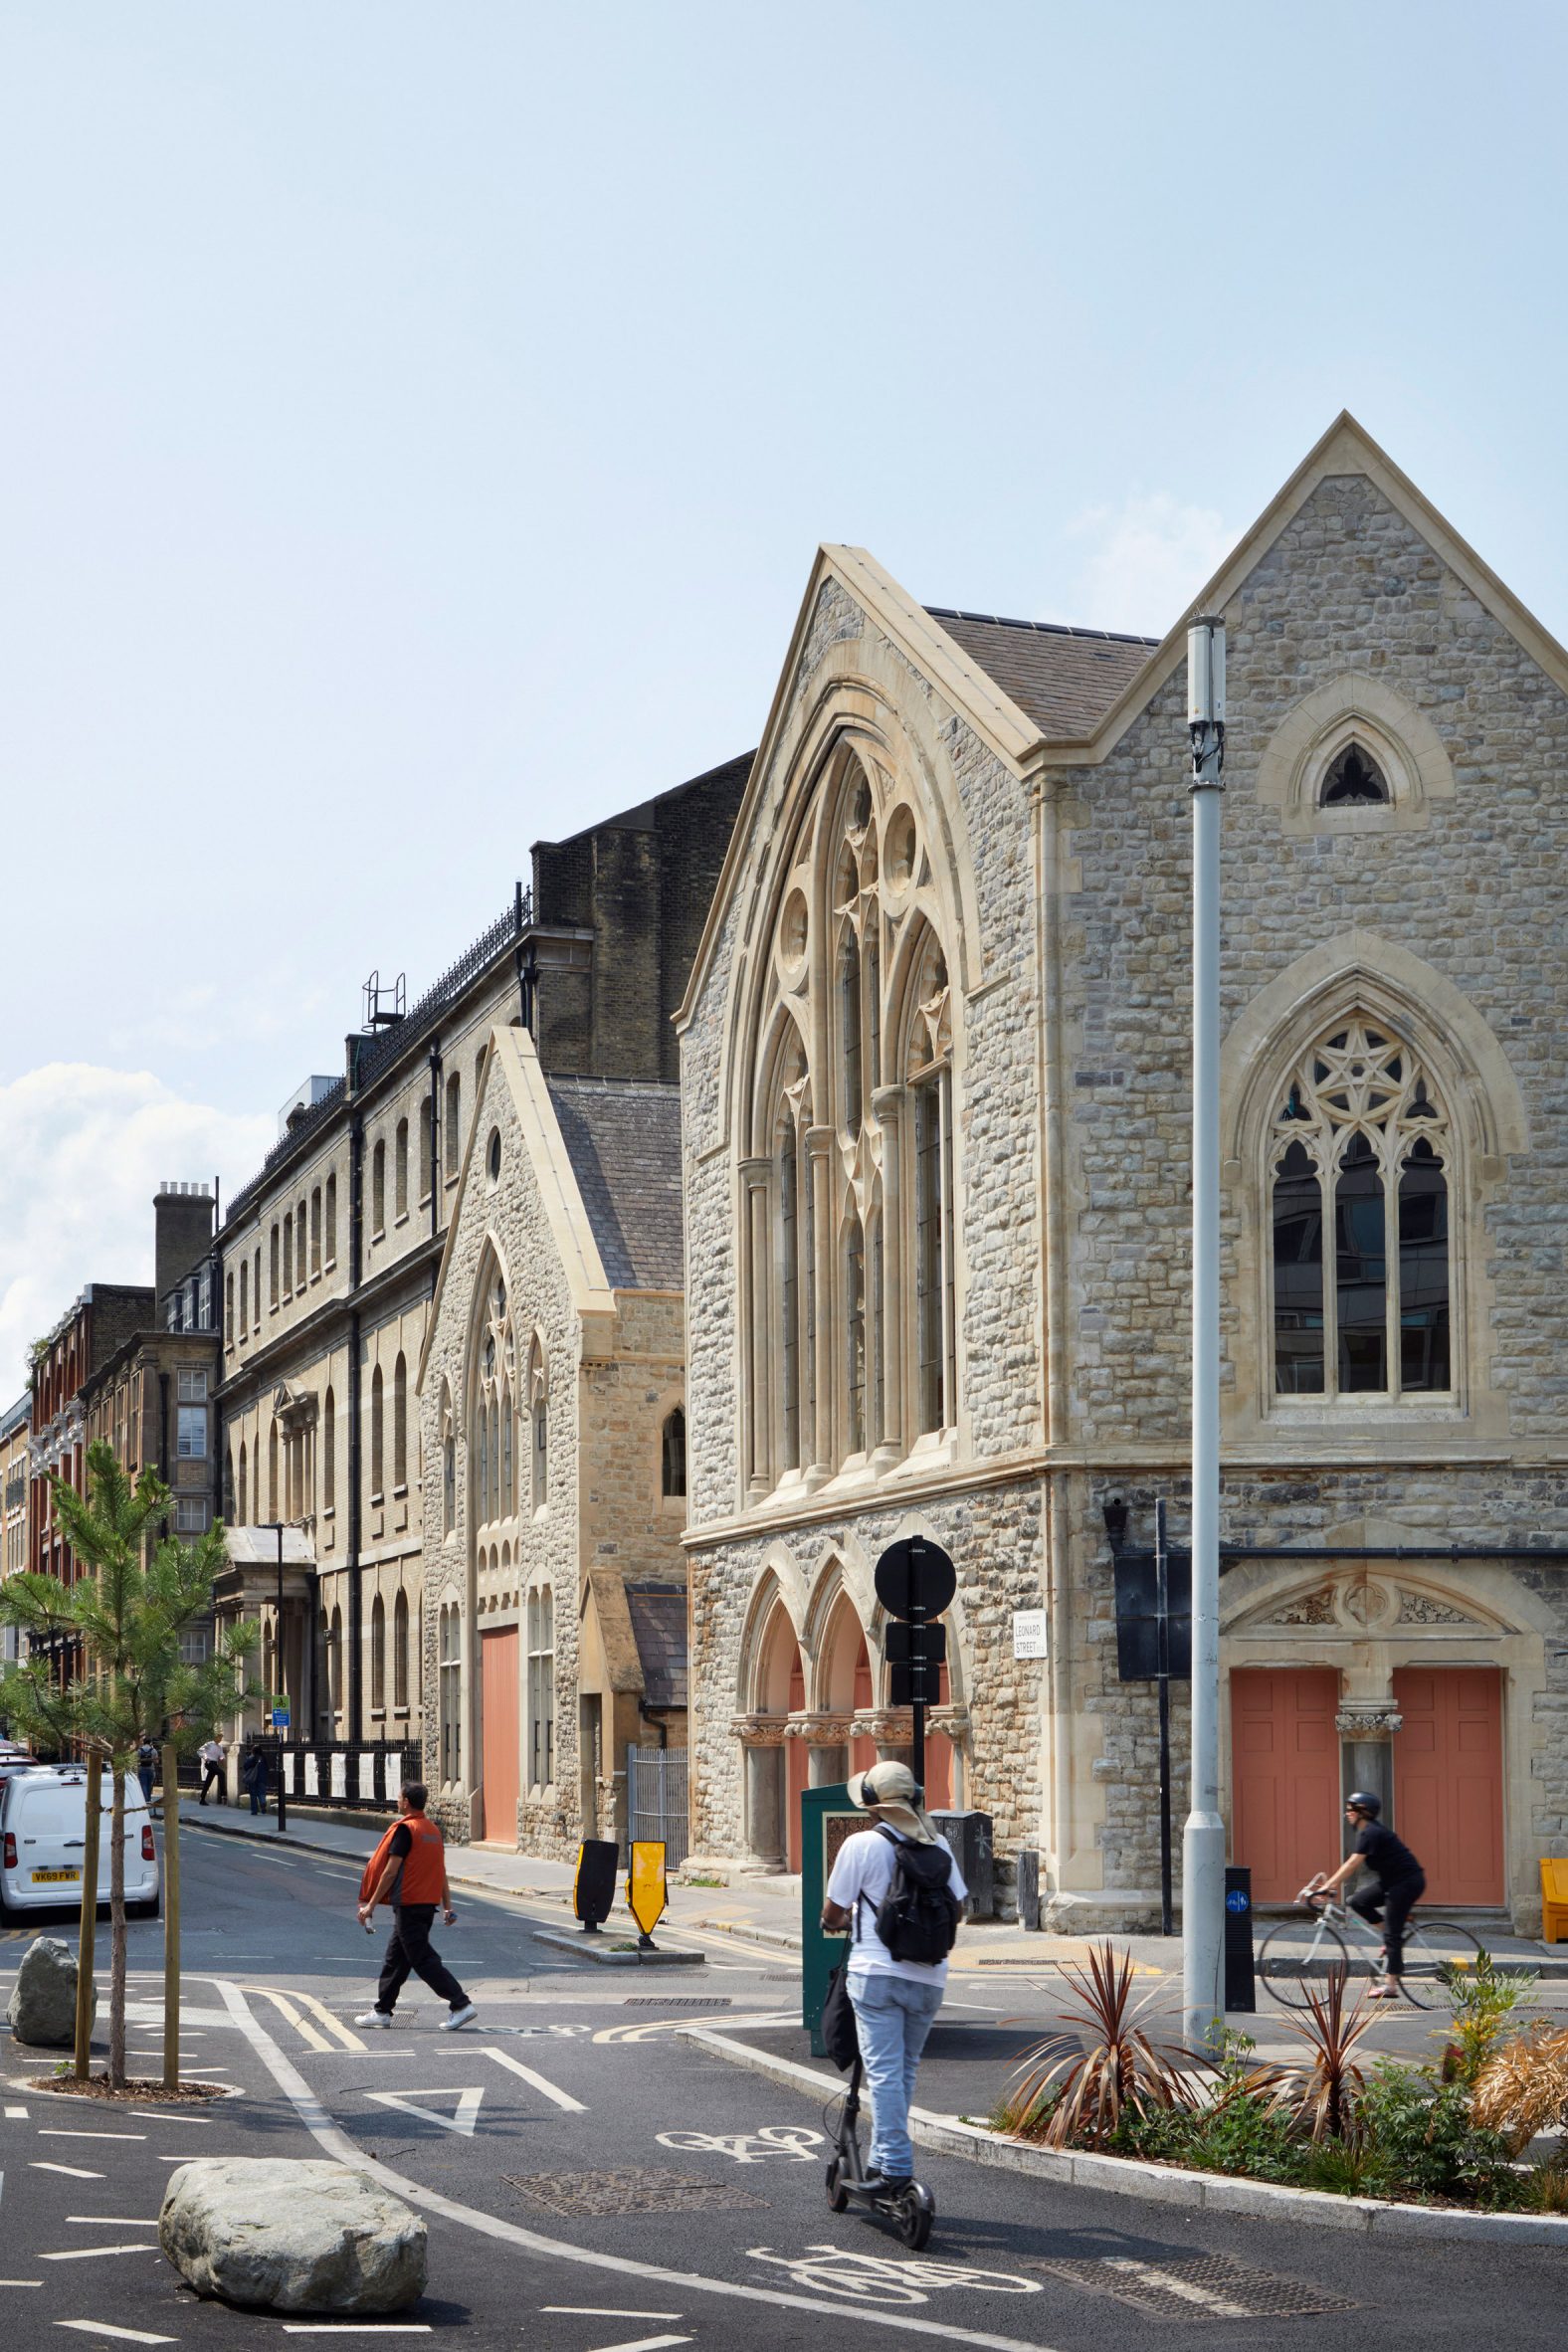 Central Foundation Boys' School in a historic chapel renovated by Hawkins\Brown